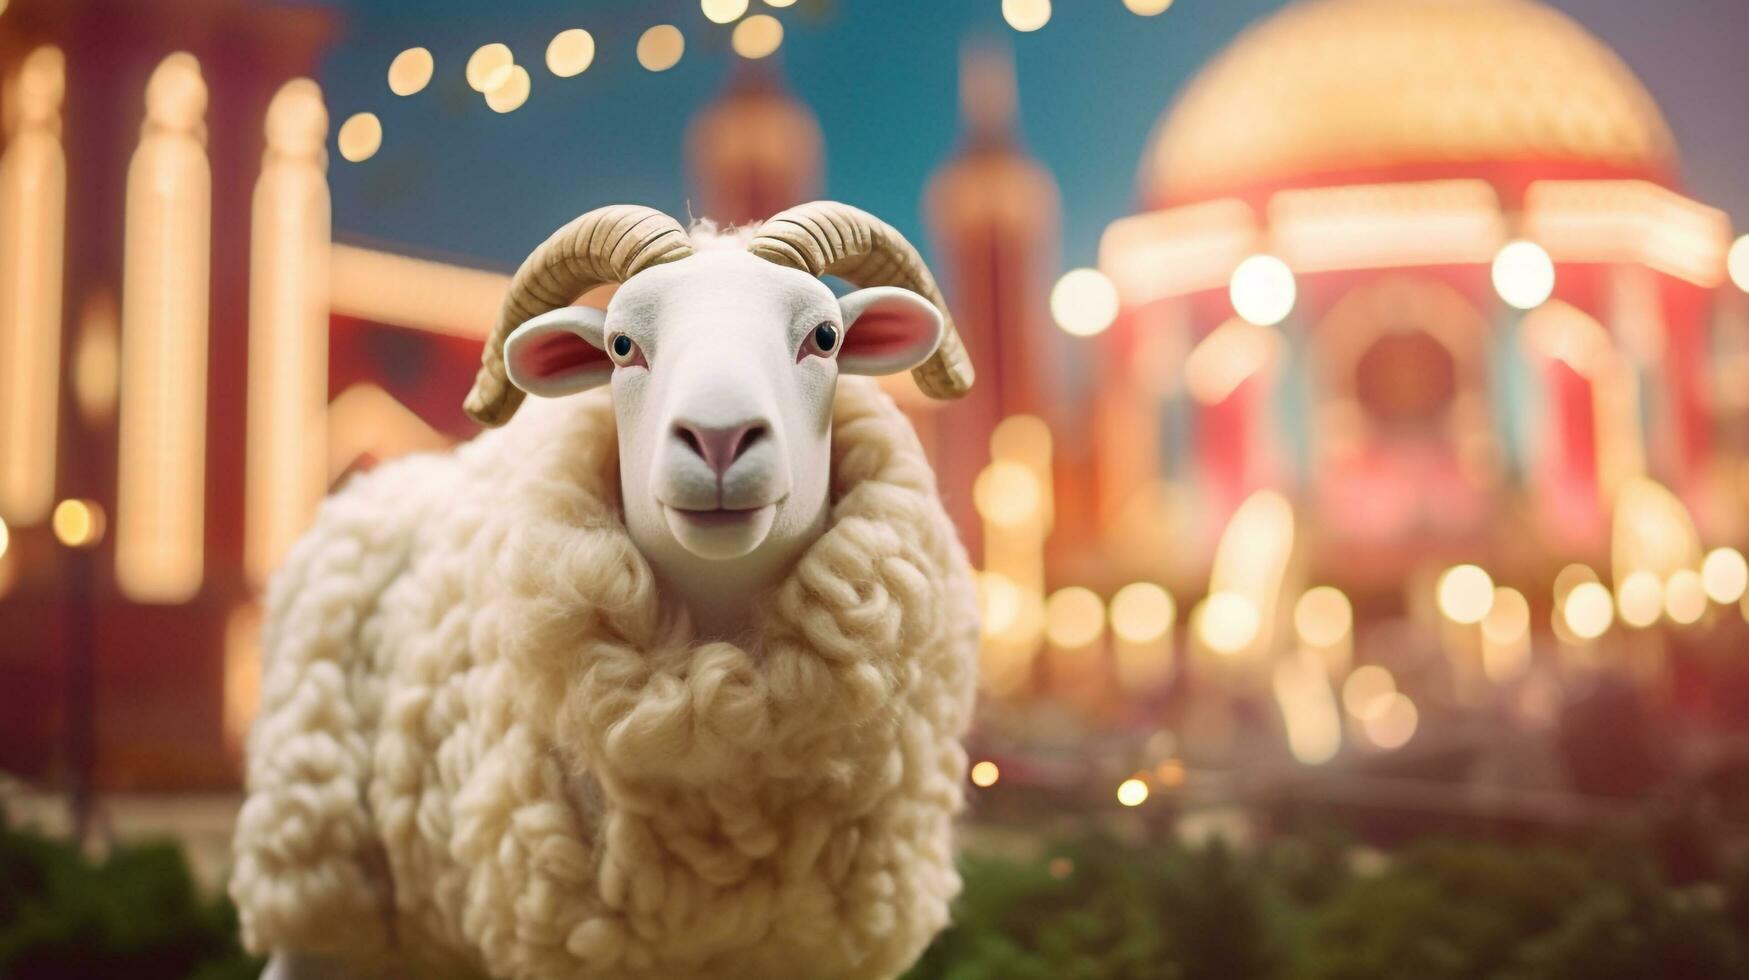 AI Generative Sheep and Mosque on Eid Al Adha Nighttime with Bright Neon on The Background photo